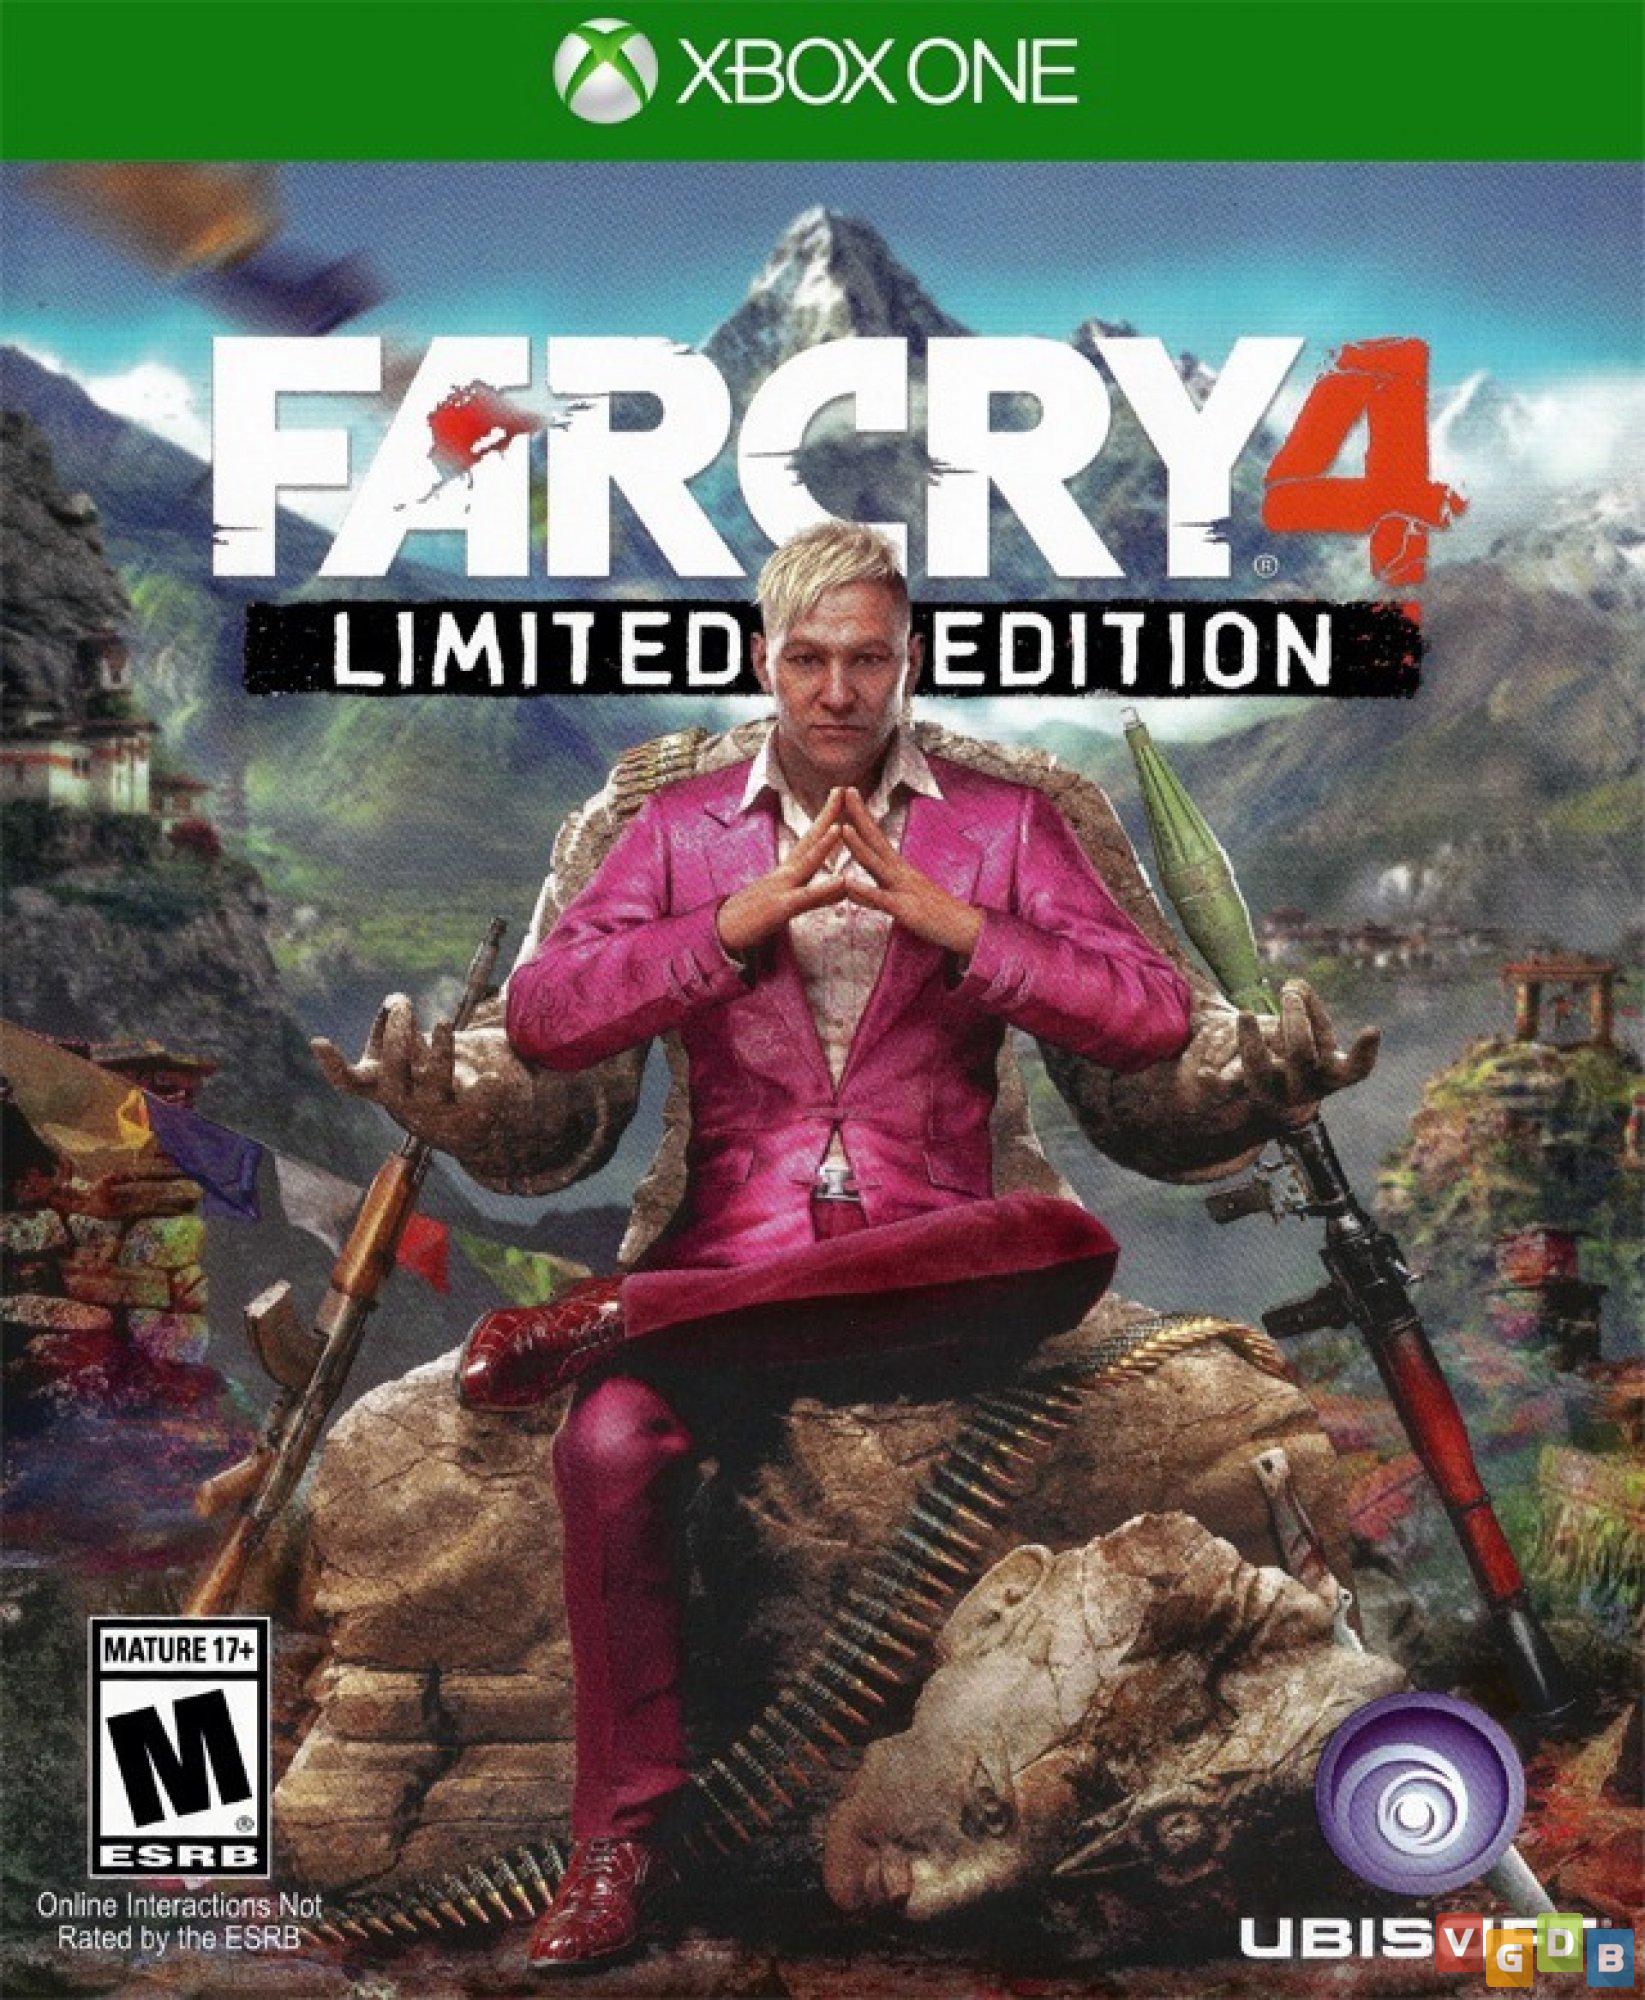 Far Cry 4 / Far Cry Primal Double Pack for PlayStation 4